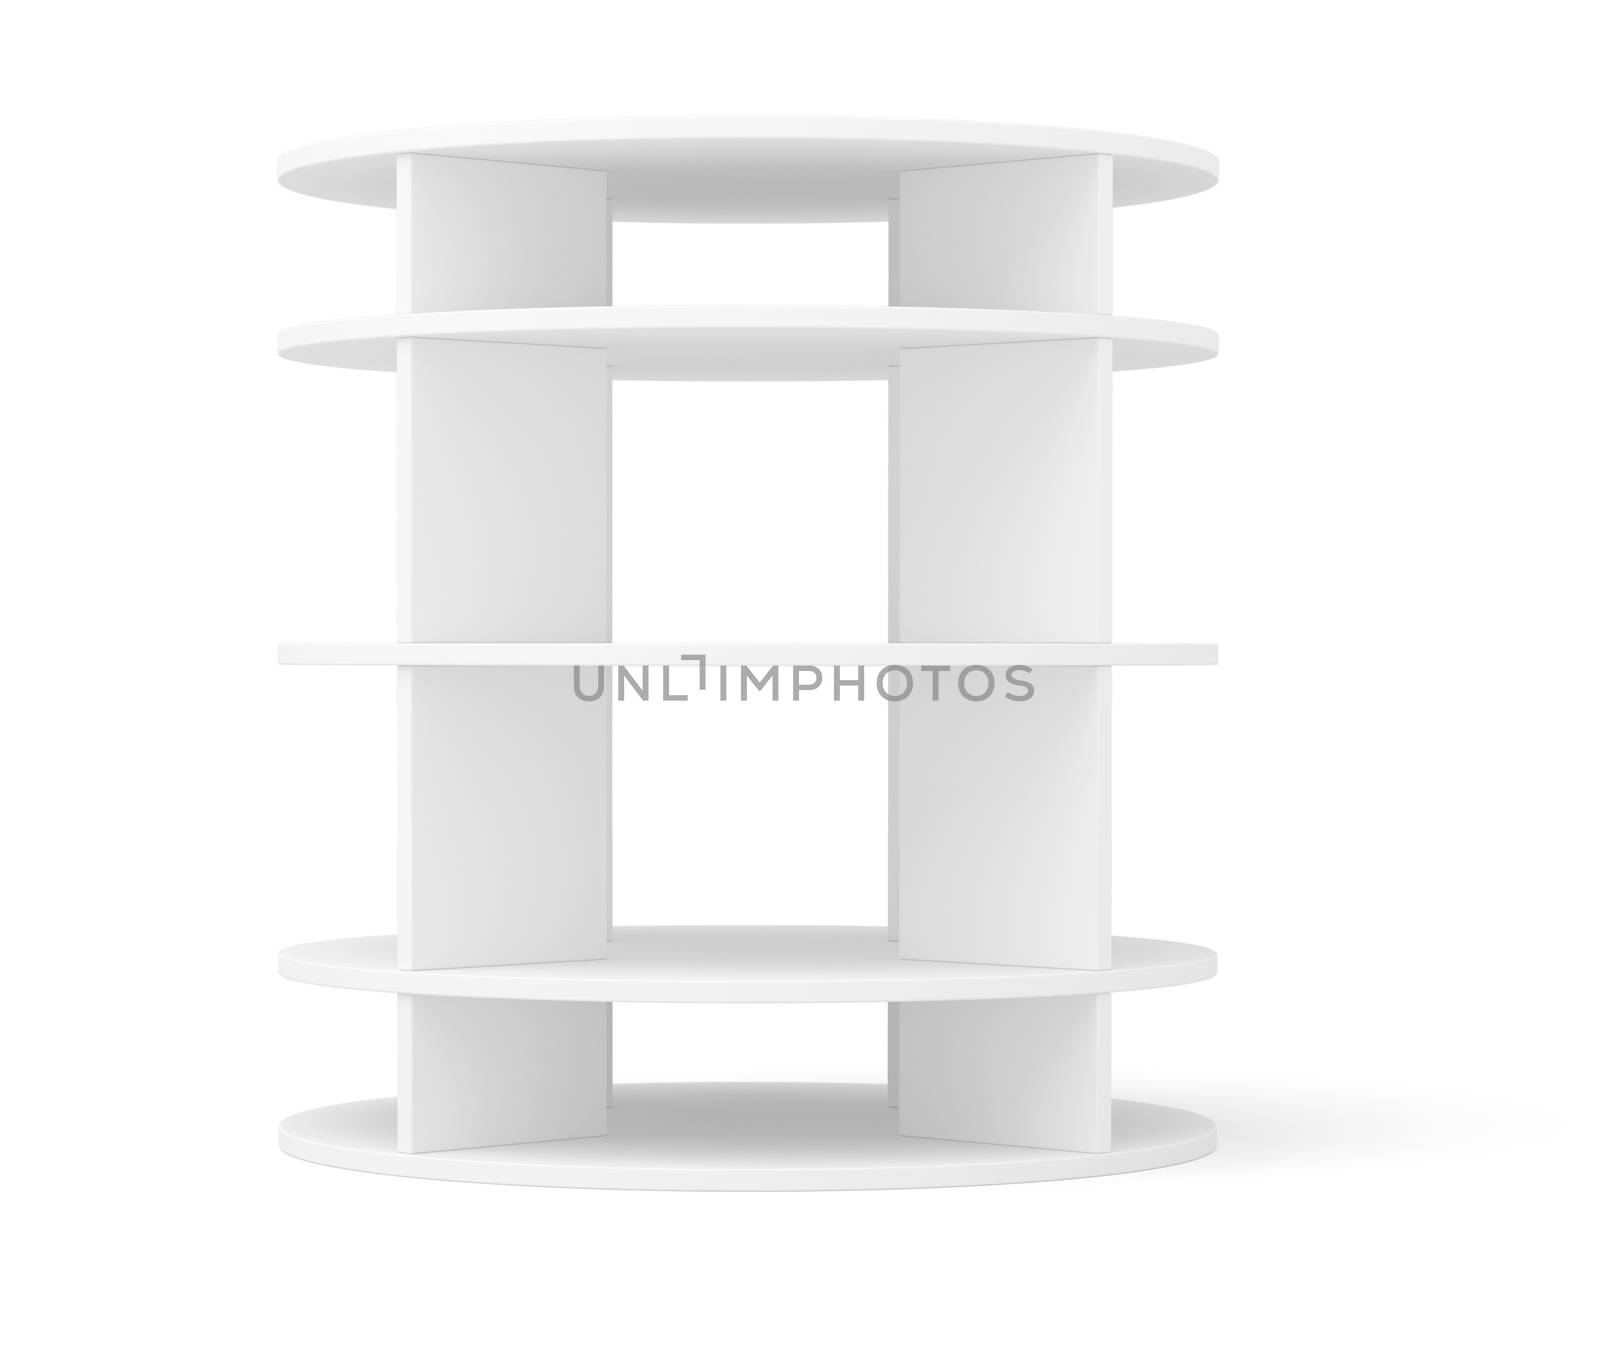 Round showcase for supermarket. Front View. Isolated on white background. 3D illustration